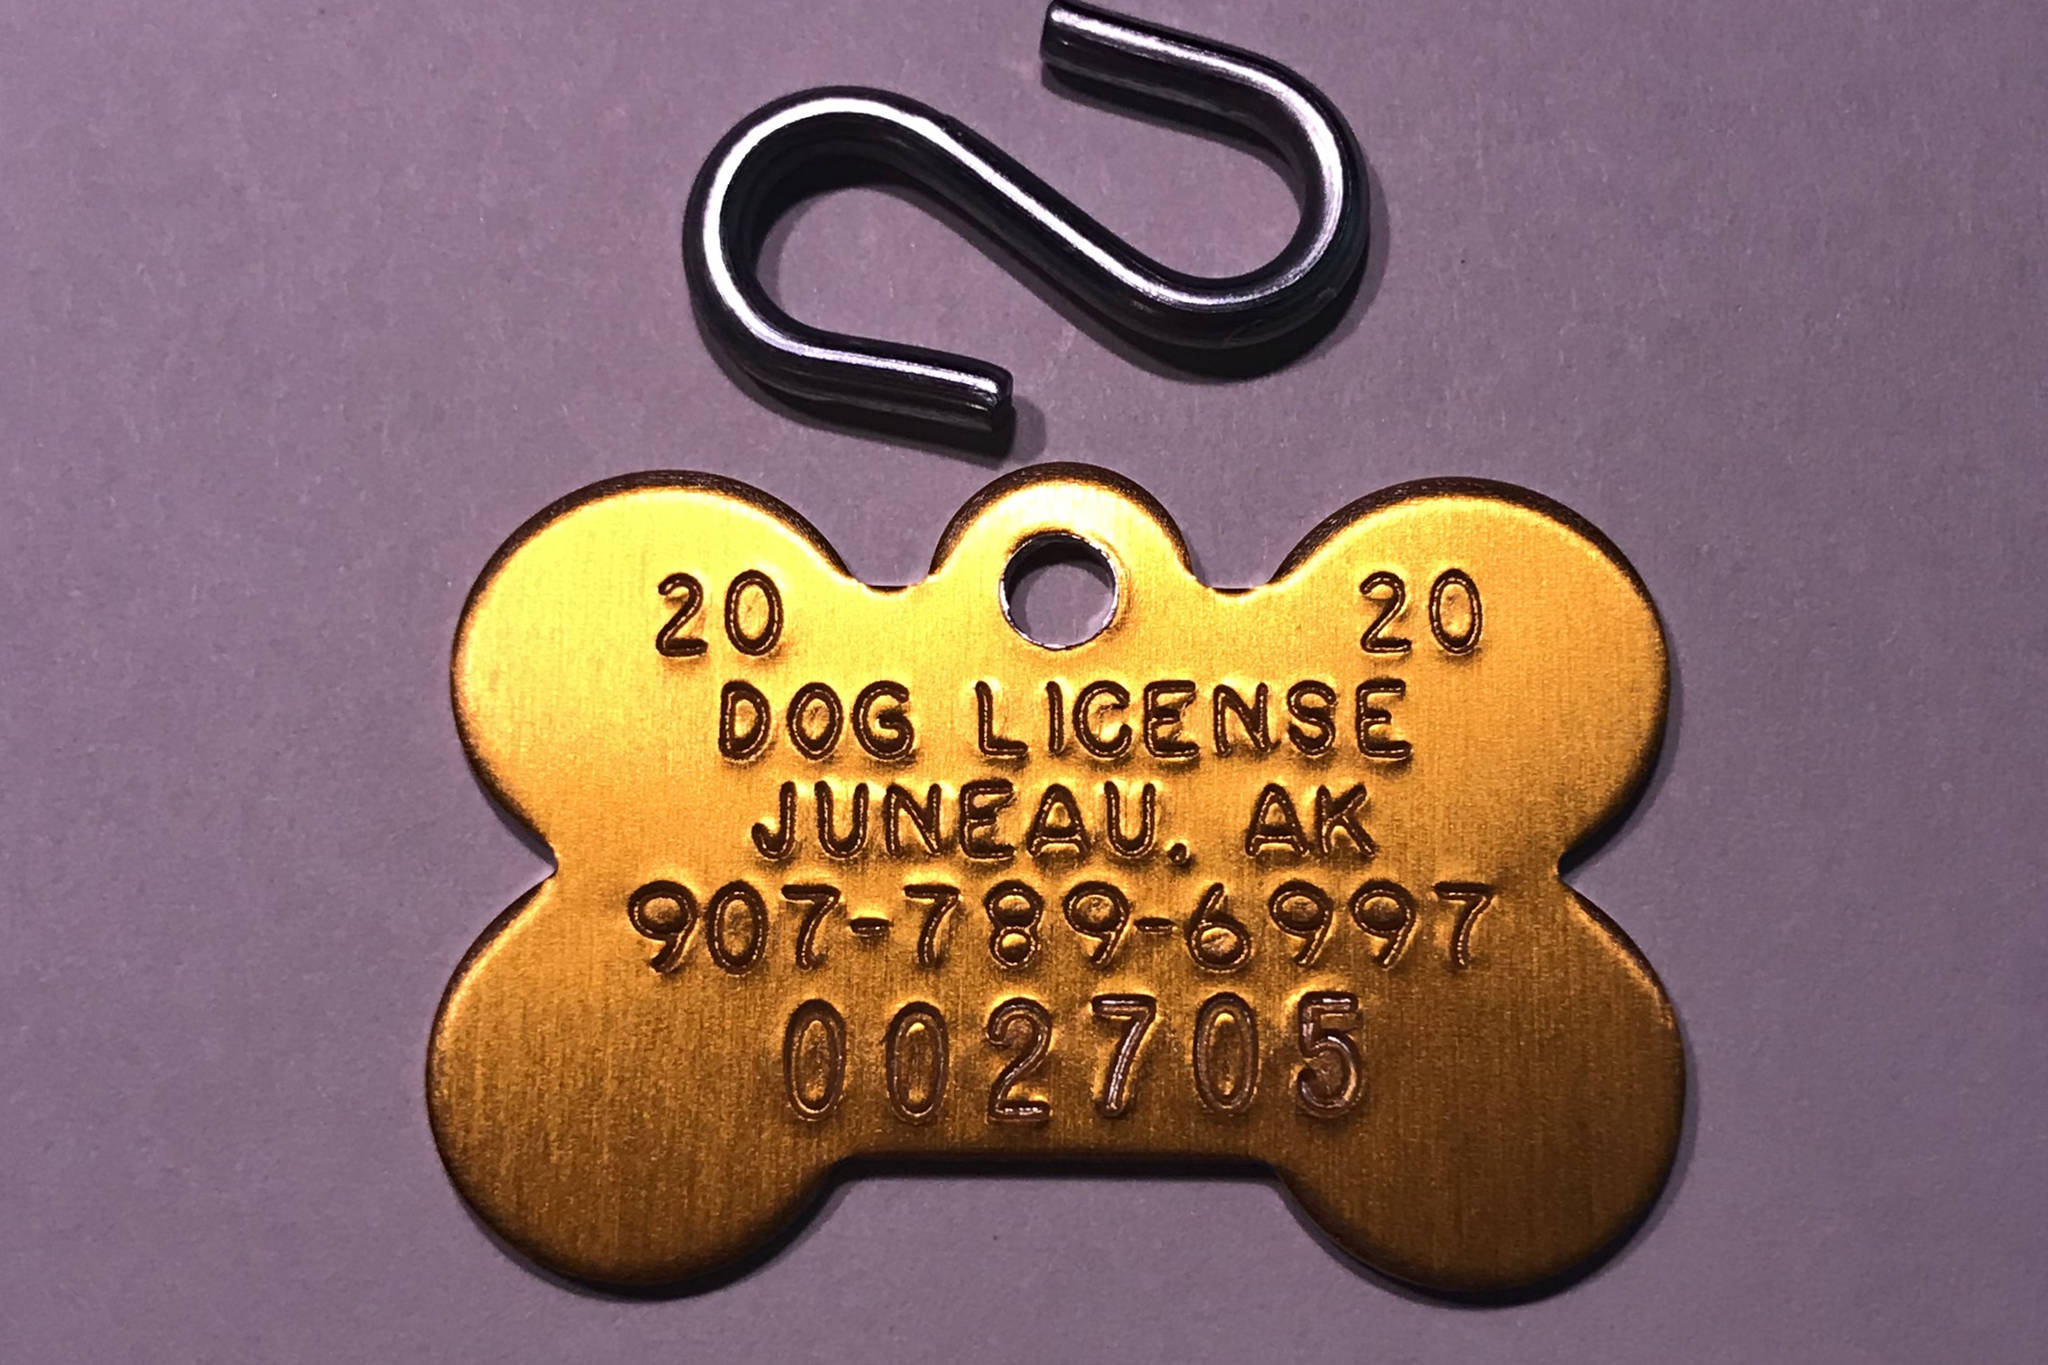 Dog licensing is required by law, saves lives and is not very popular